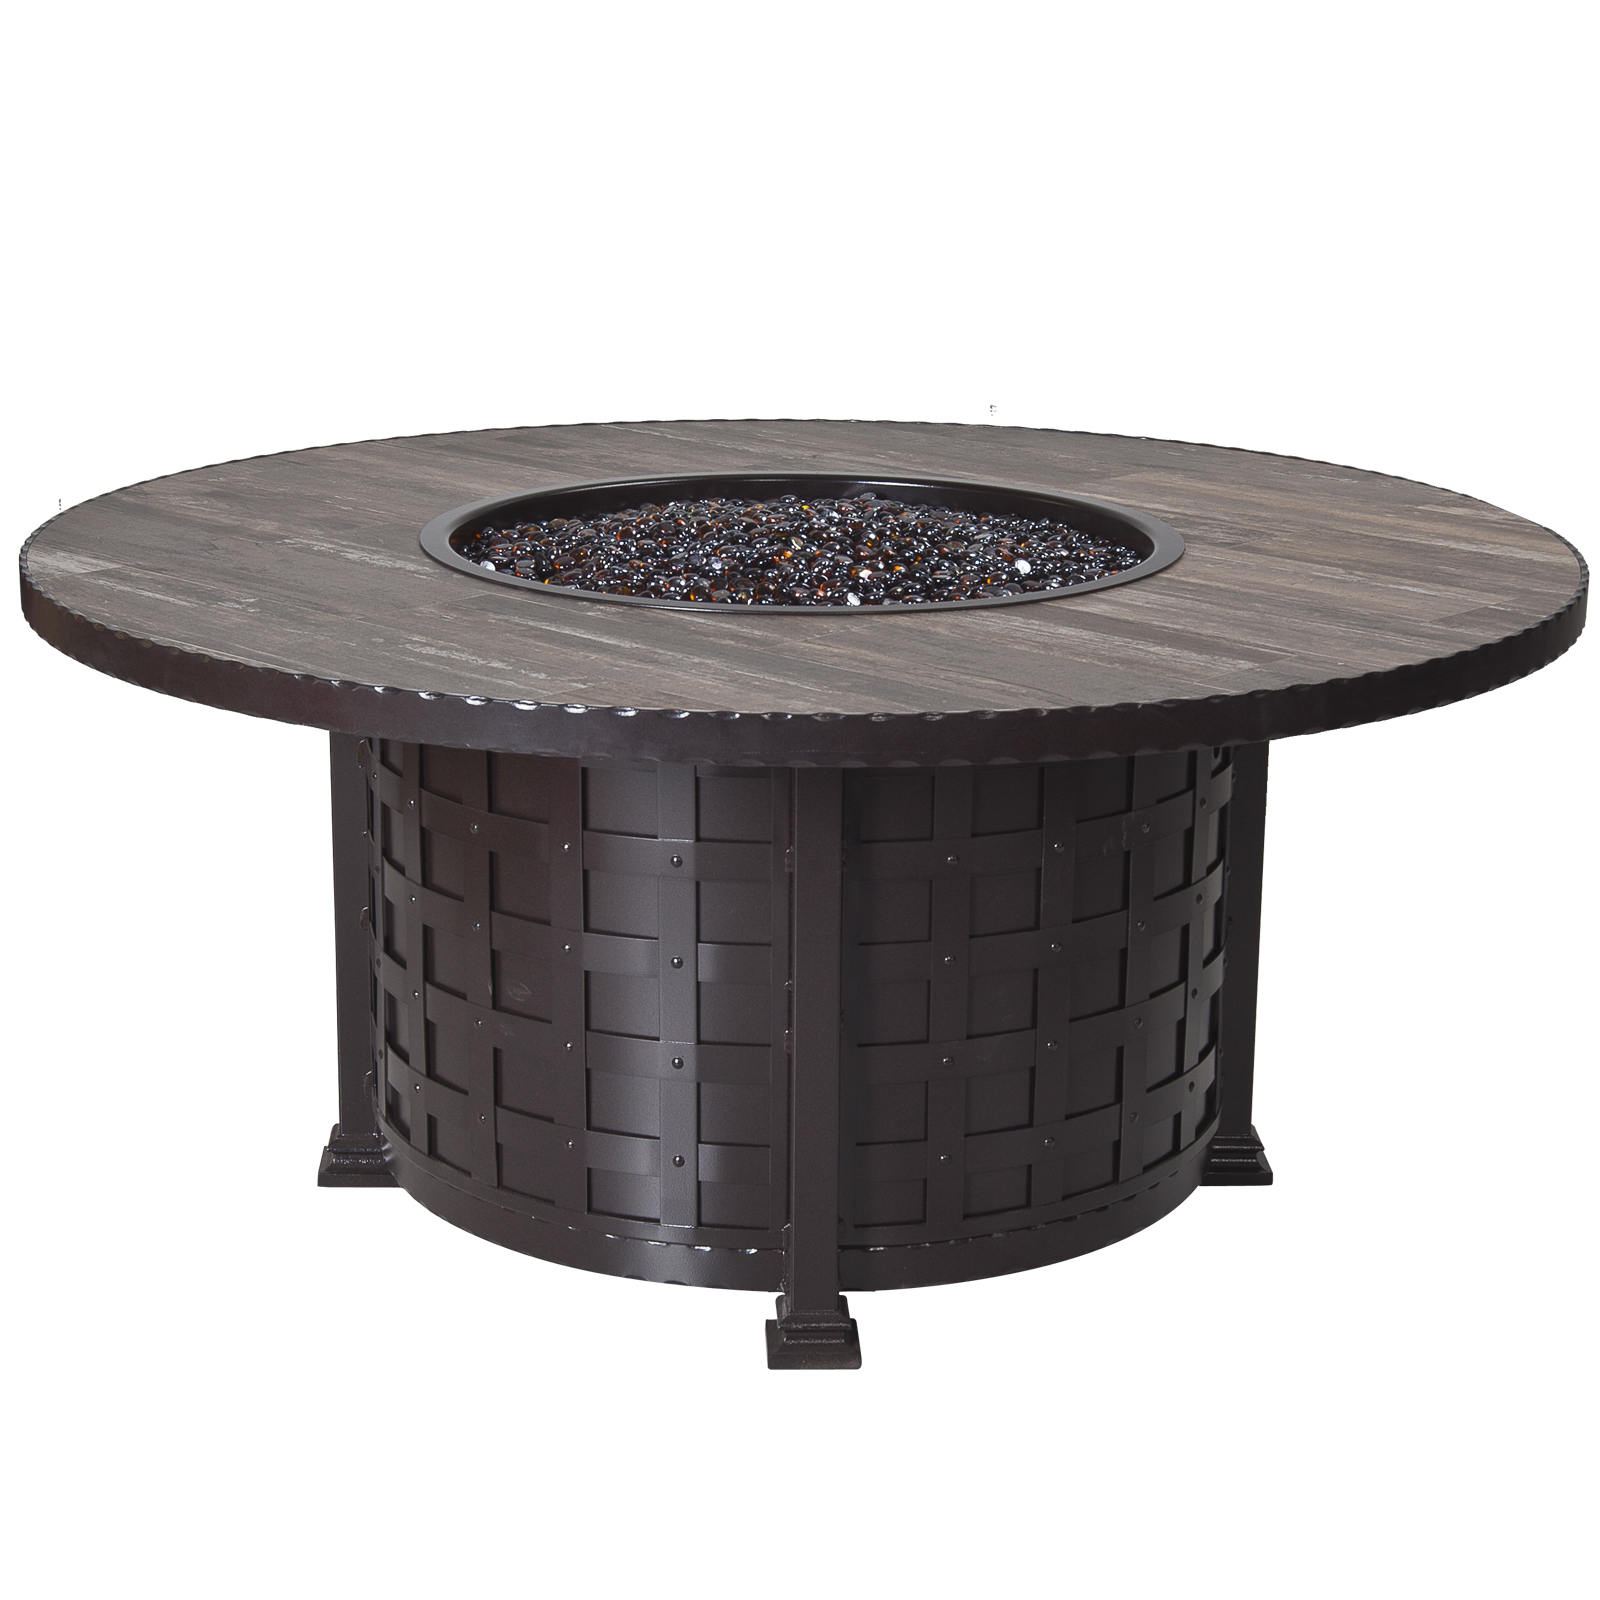 42-in-Chat-Height-Classico-Fire-Pit-51-10C-Classico-W-OW-Lee